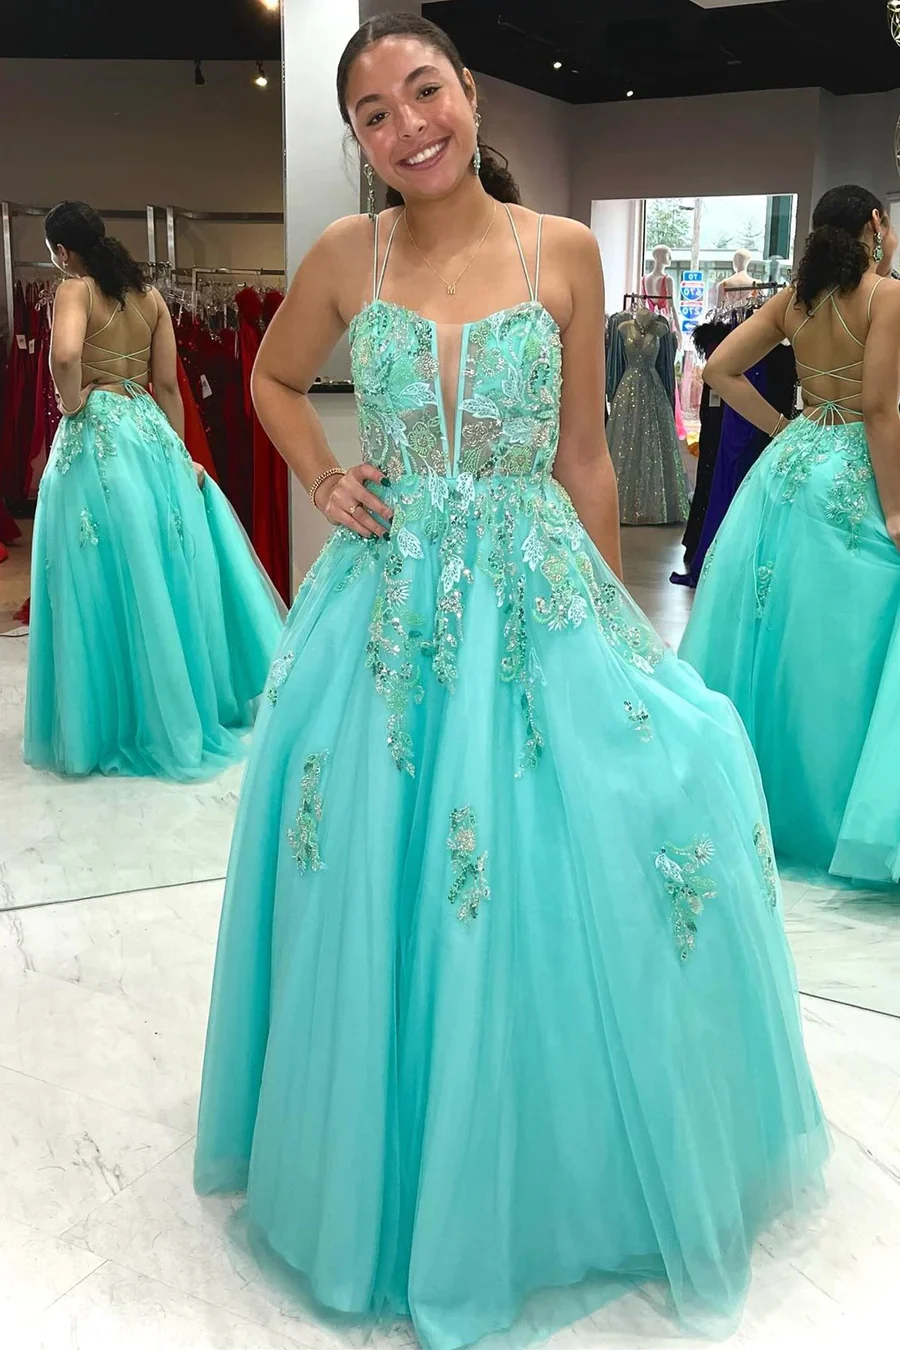 Turquoise Tulle A-Line Prom Dresses with Spaghetti Straps, PD2404255